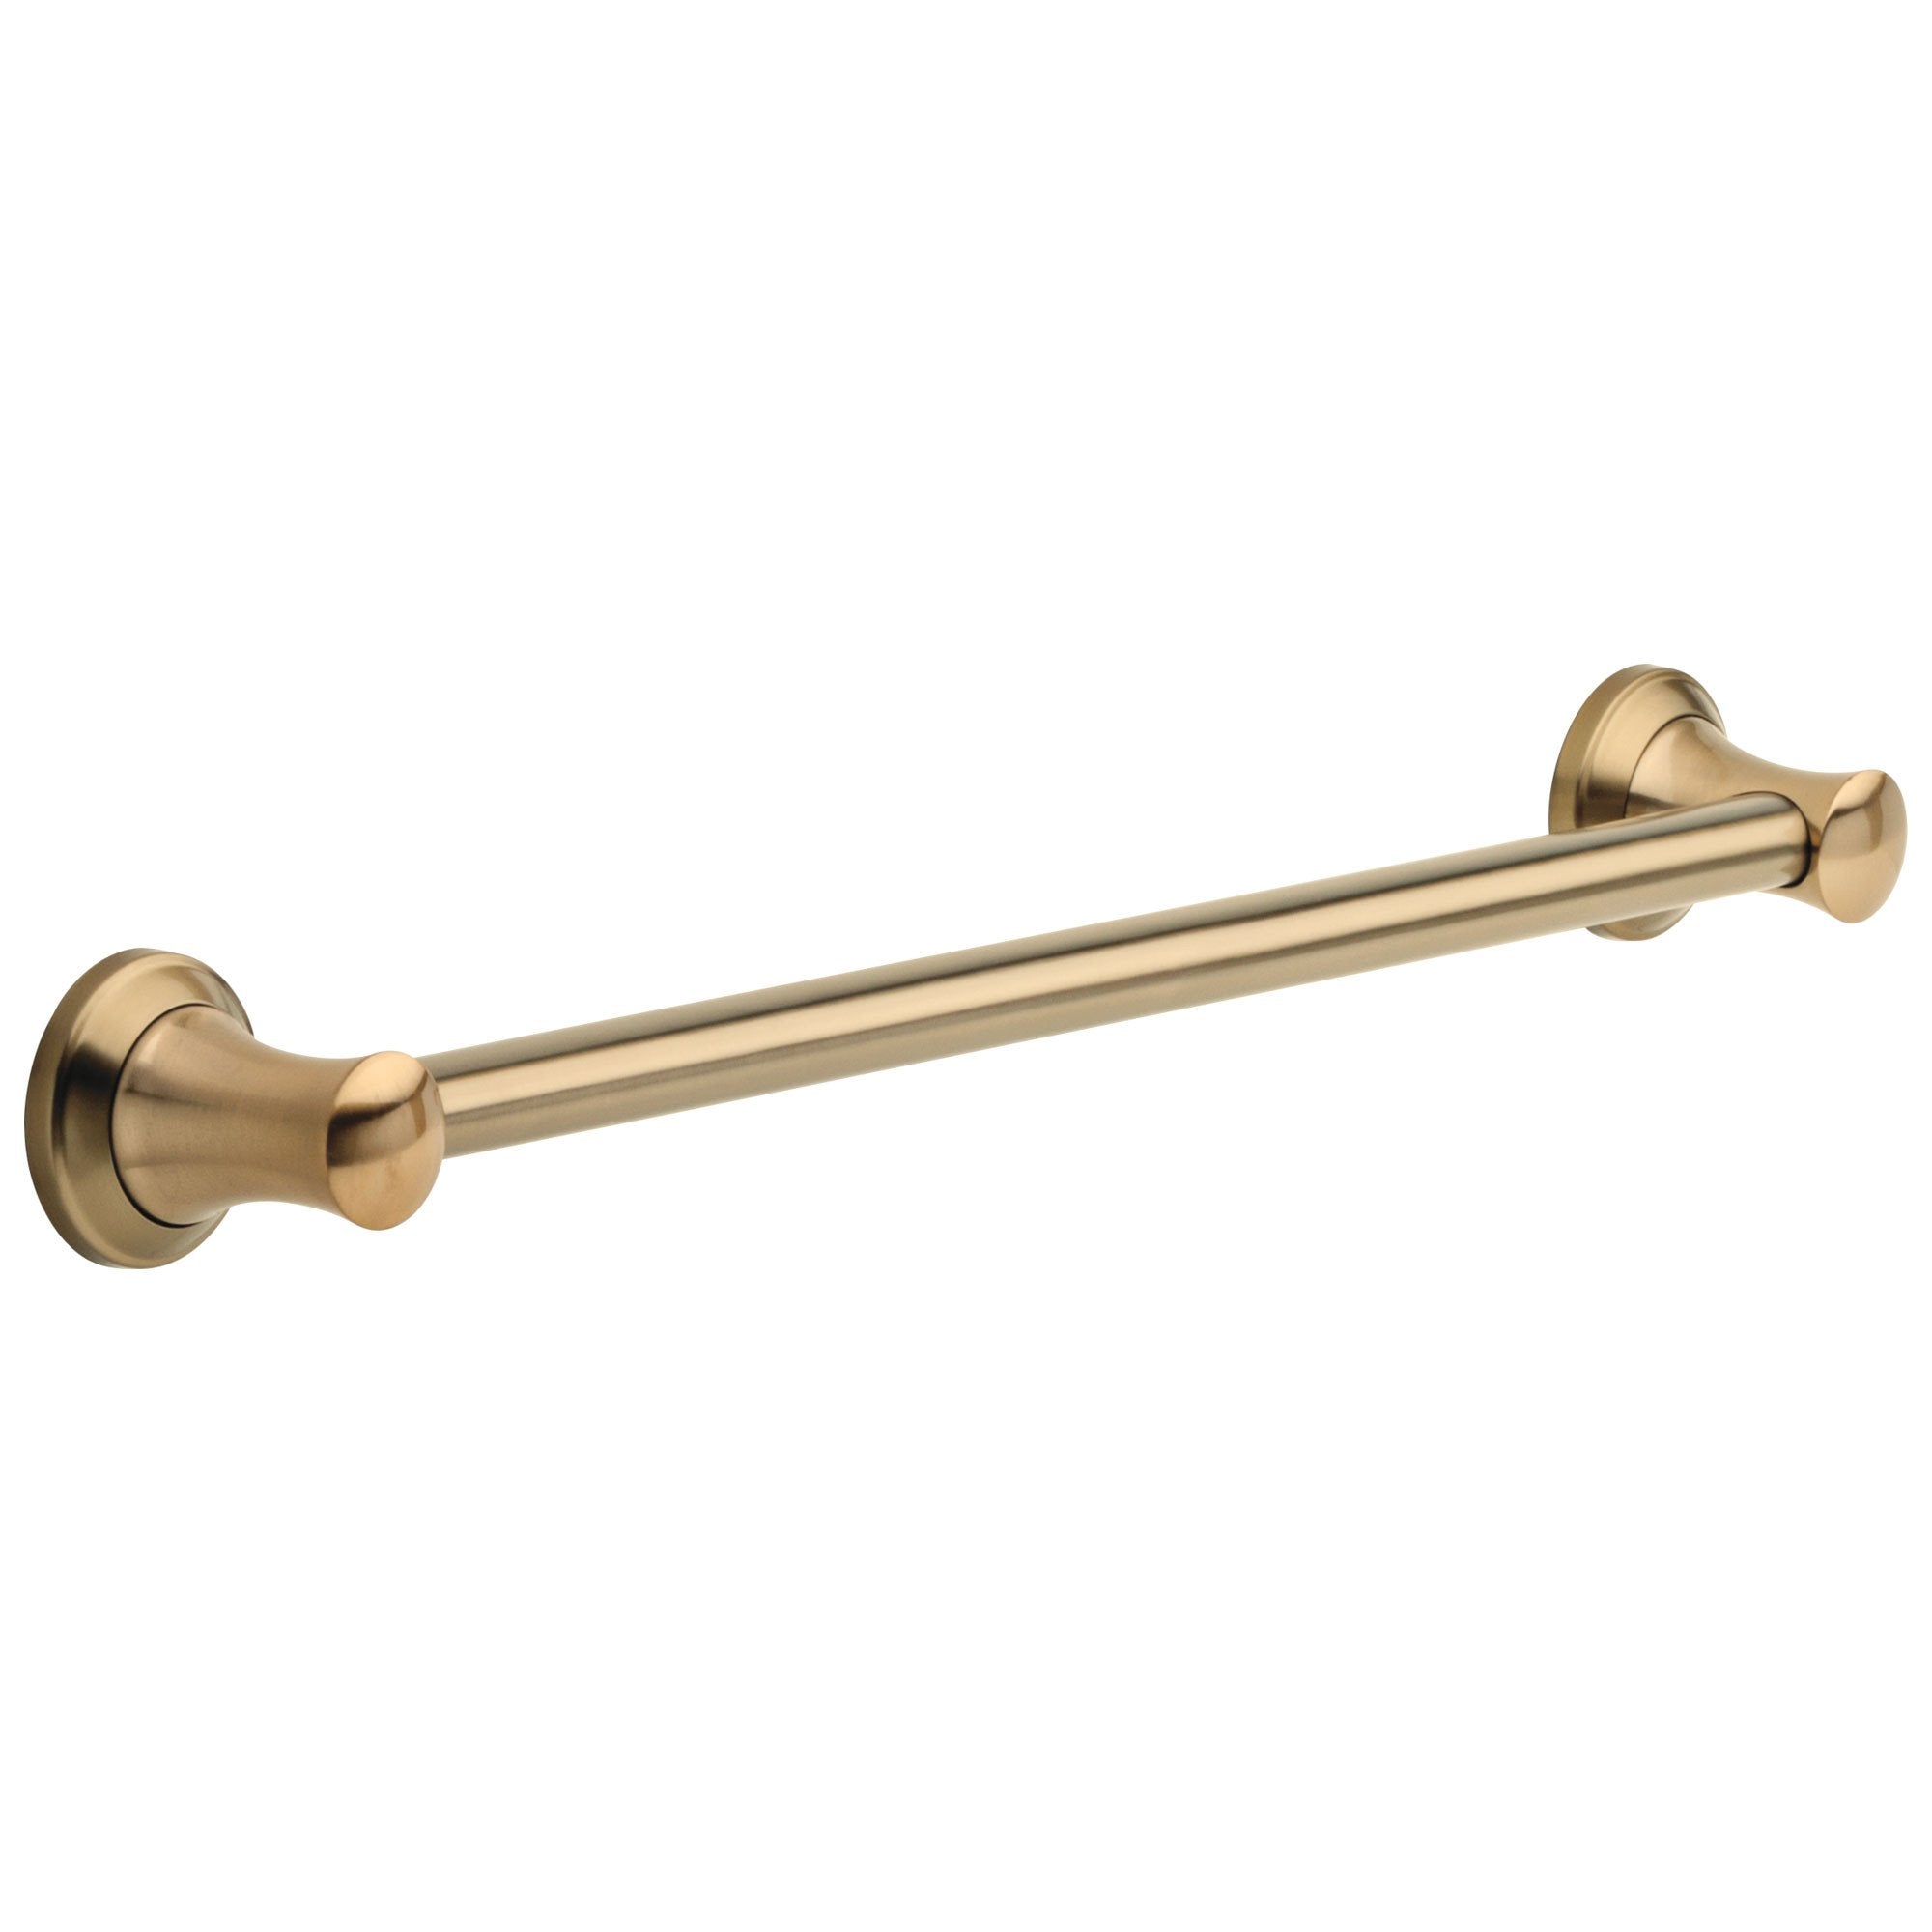 Delta Bath Safety Collection Champagne Bronze Finish Transitional Style Decorative ADA Approved 24" Grab Bar for Bathroom or Shower D41724CZ